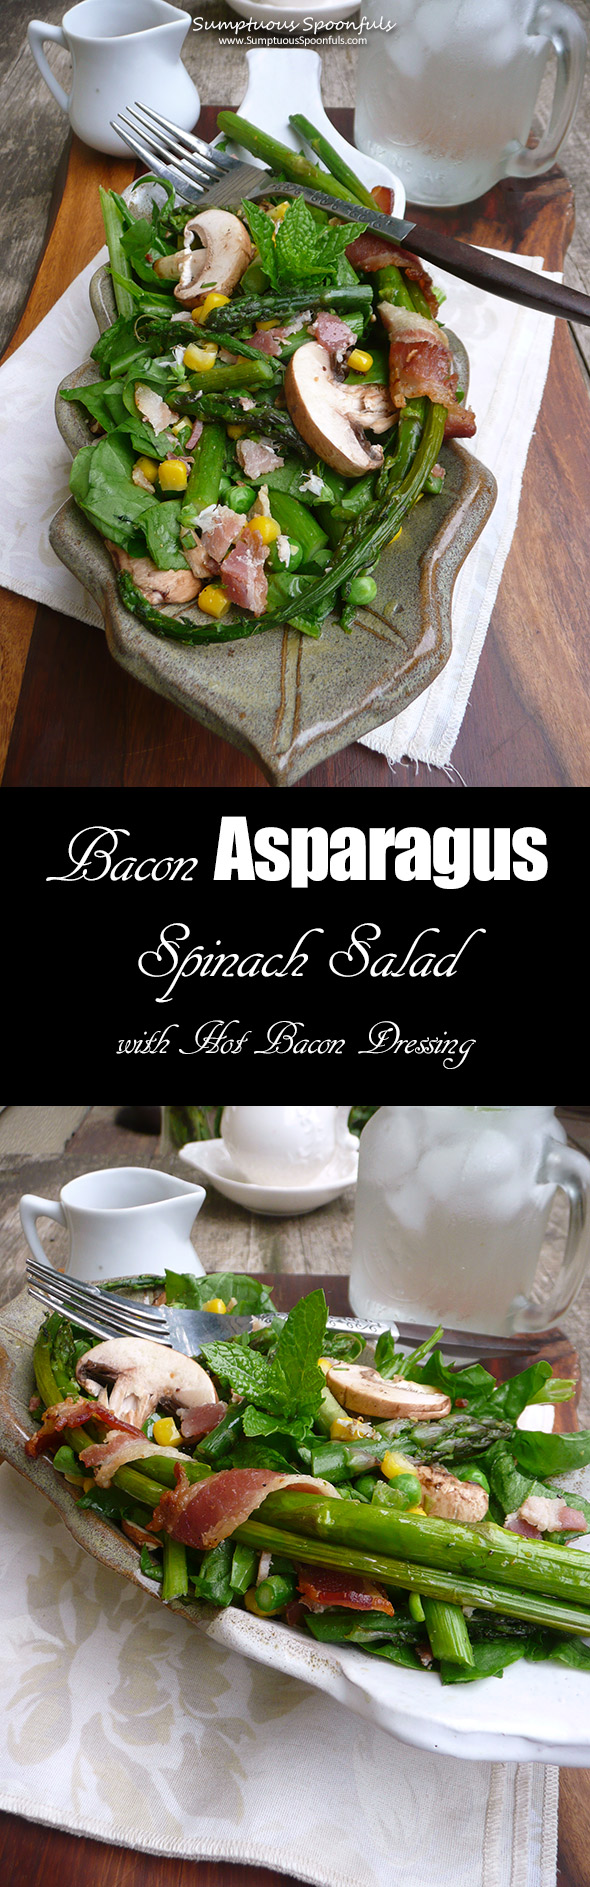 Bacon Asparagus Spinach Salad with corn, peas, mushrooms & a hot bacon dressing ~ the perfect salad for spring!